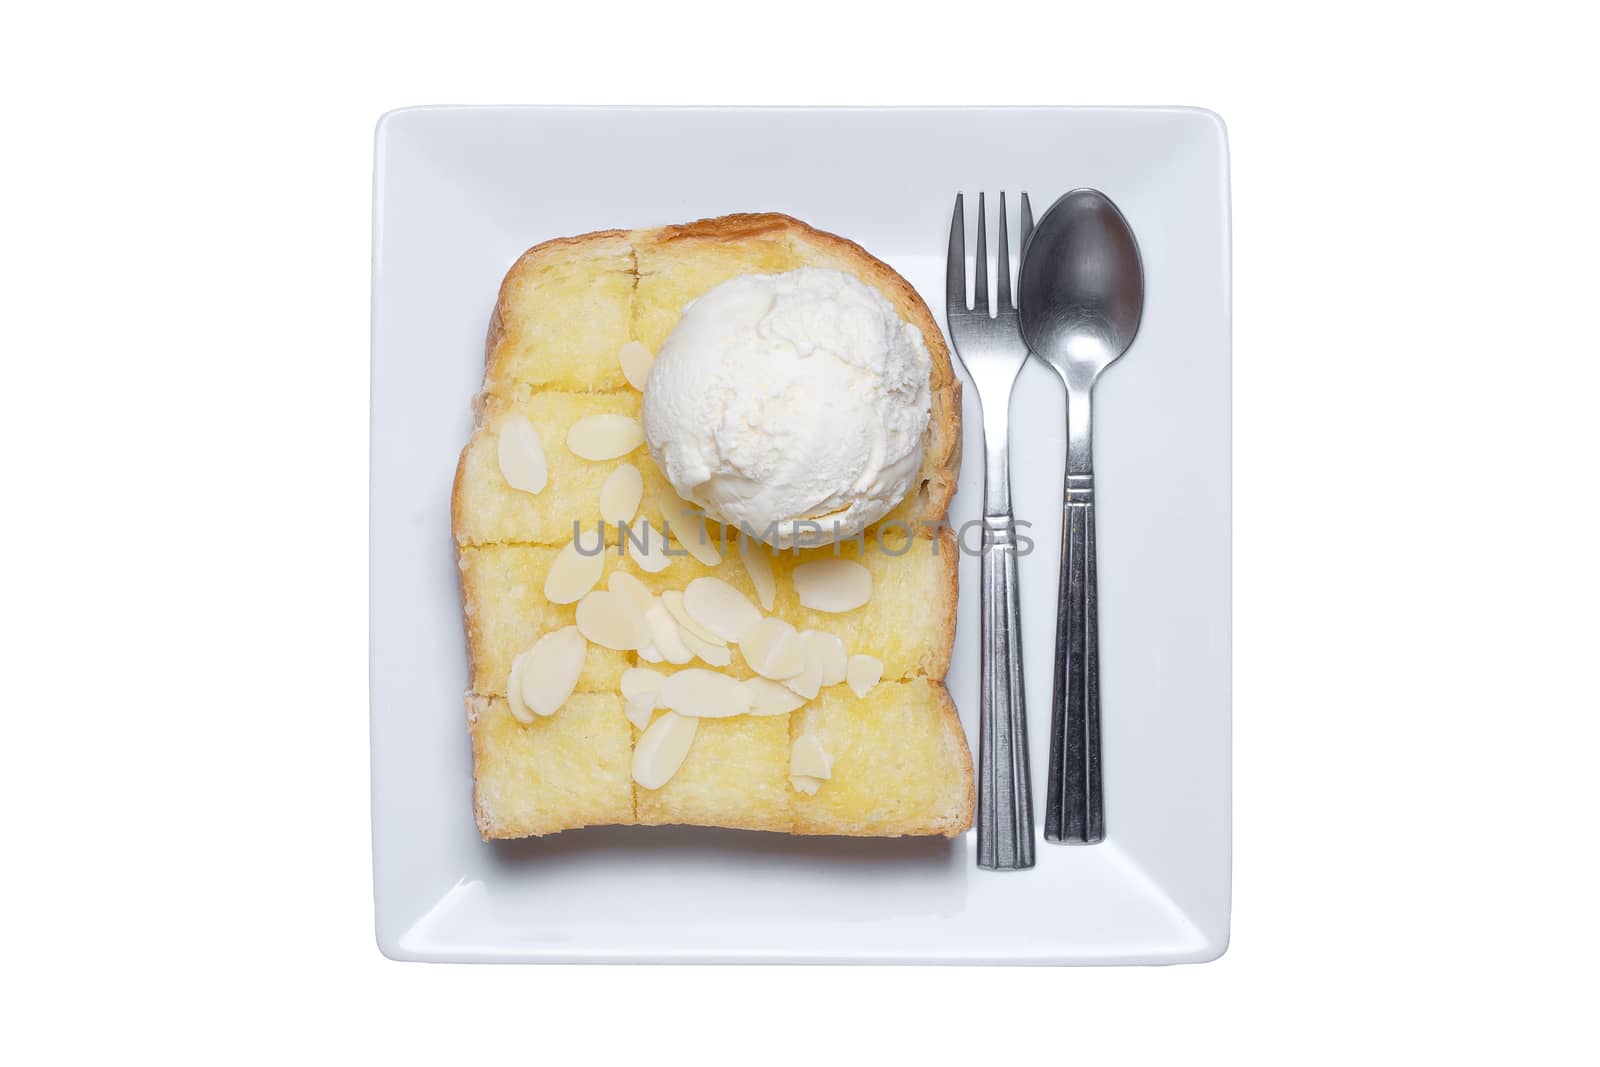 ice cream and almond slice on toast. All of it put on white ceramic dish. Isolate white background